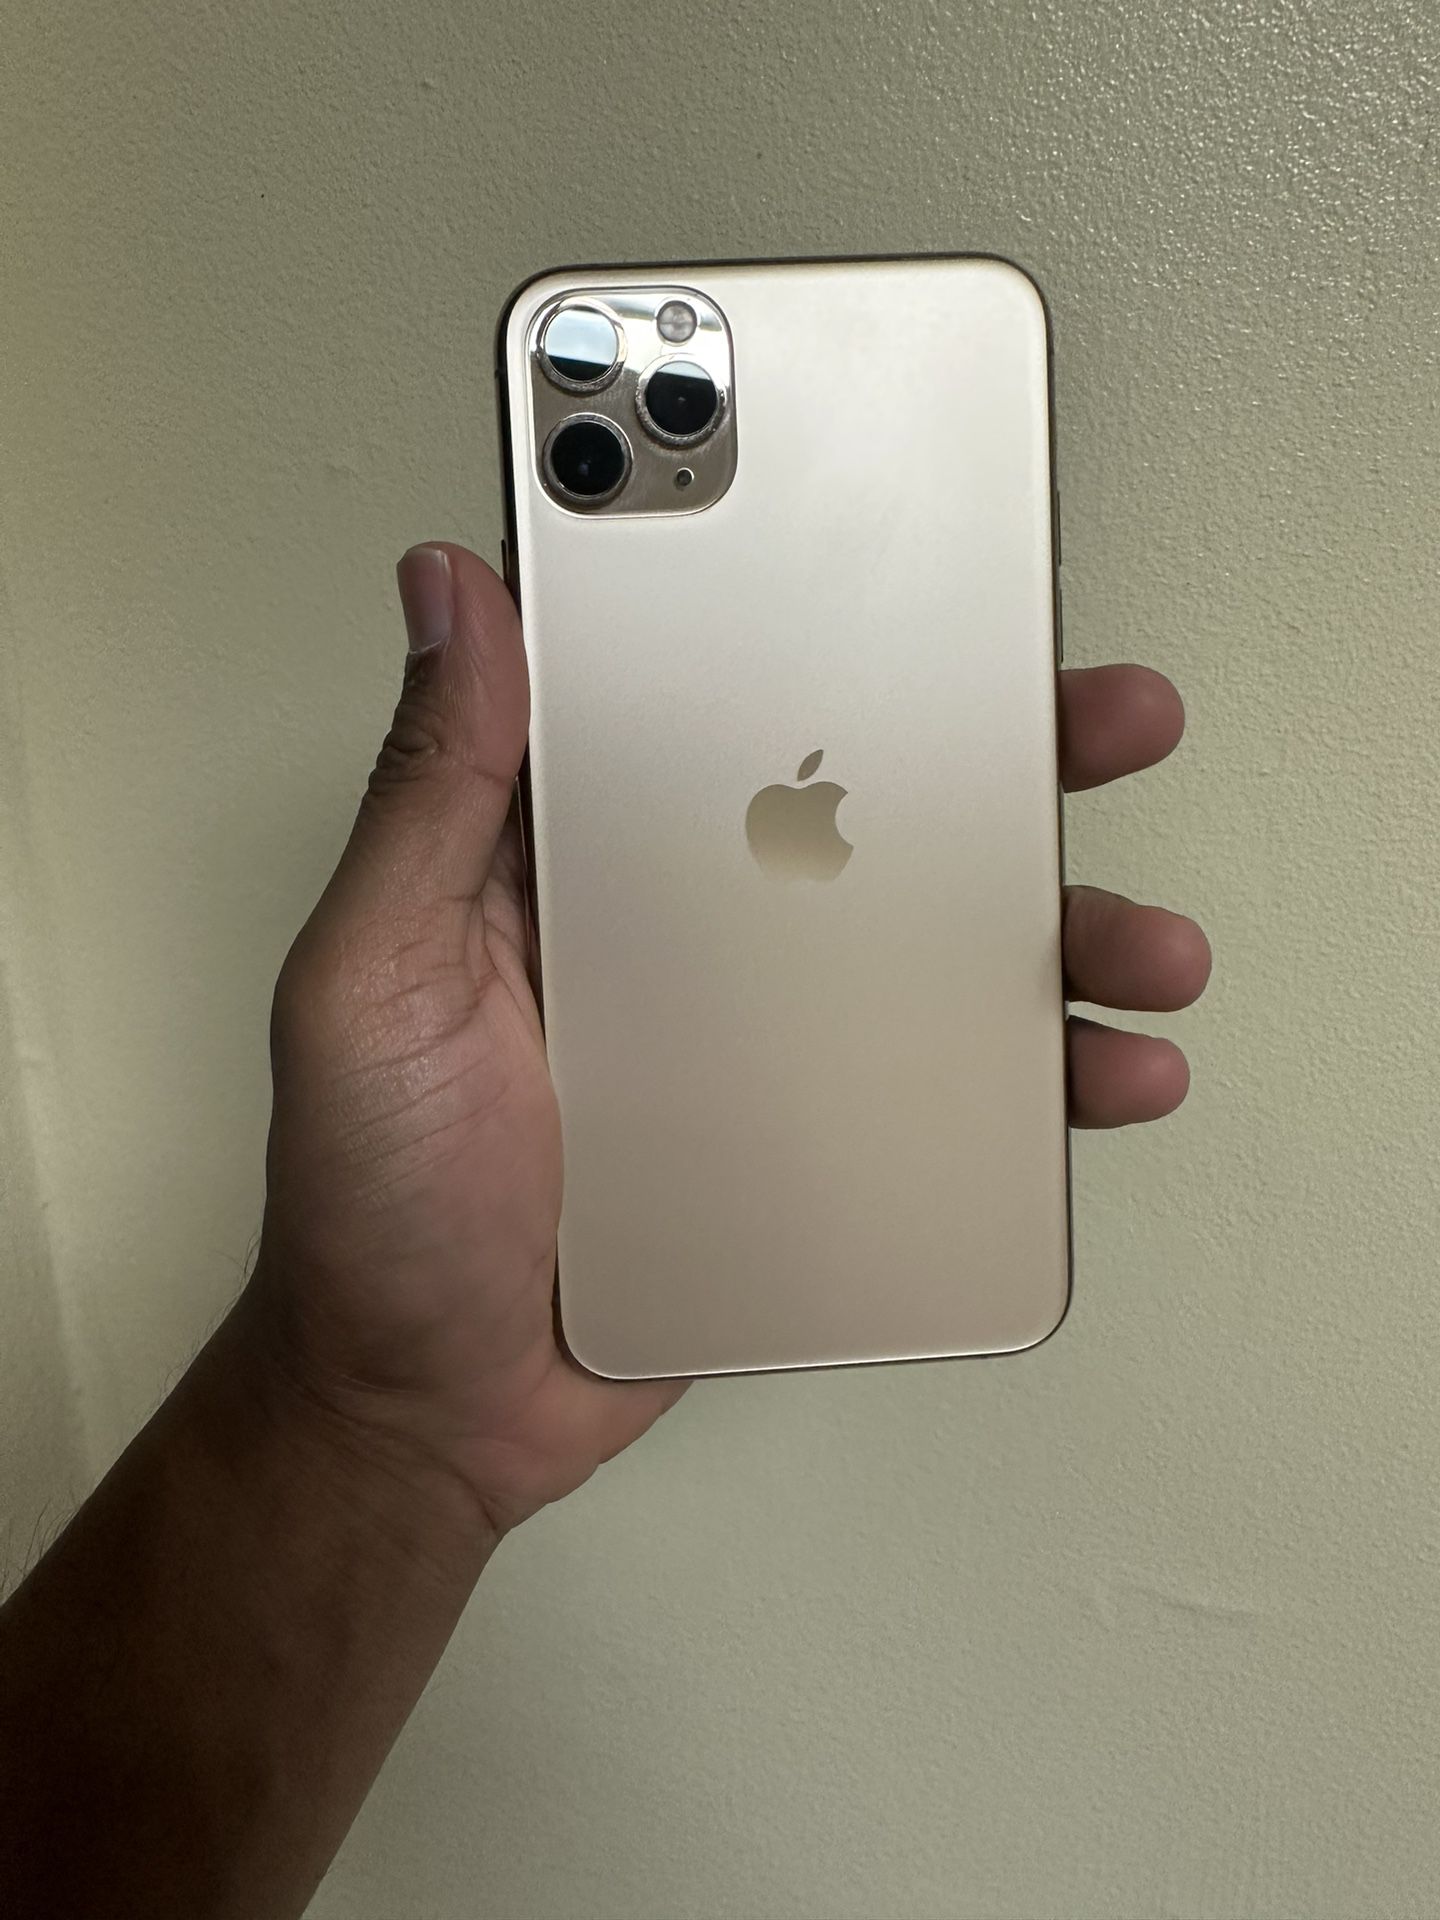 iPhone 11 Pro Max 512gb Unlocked (75% Battery Health) for Sale in